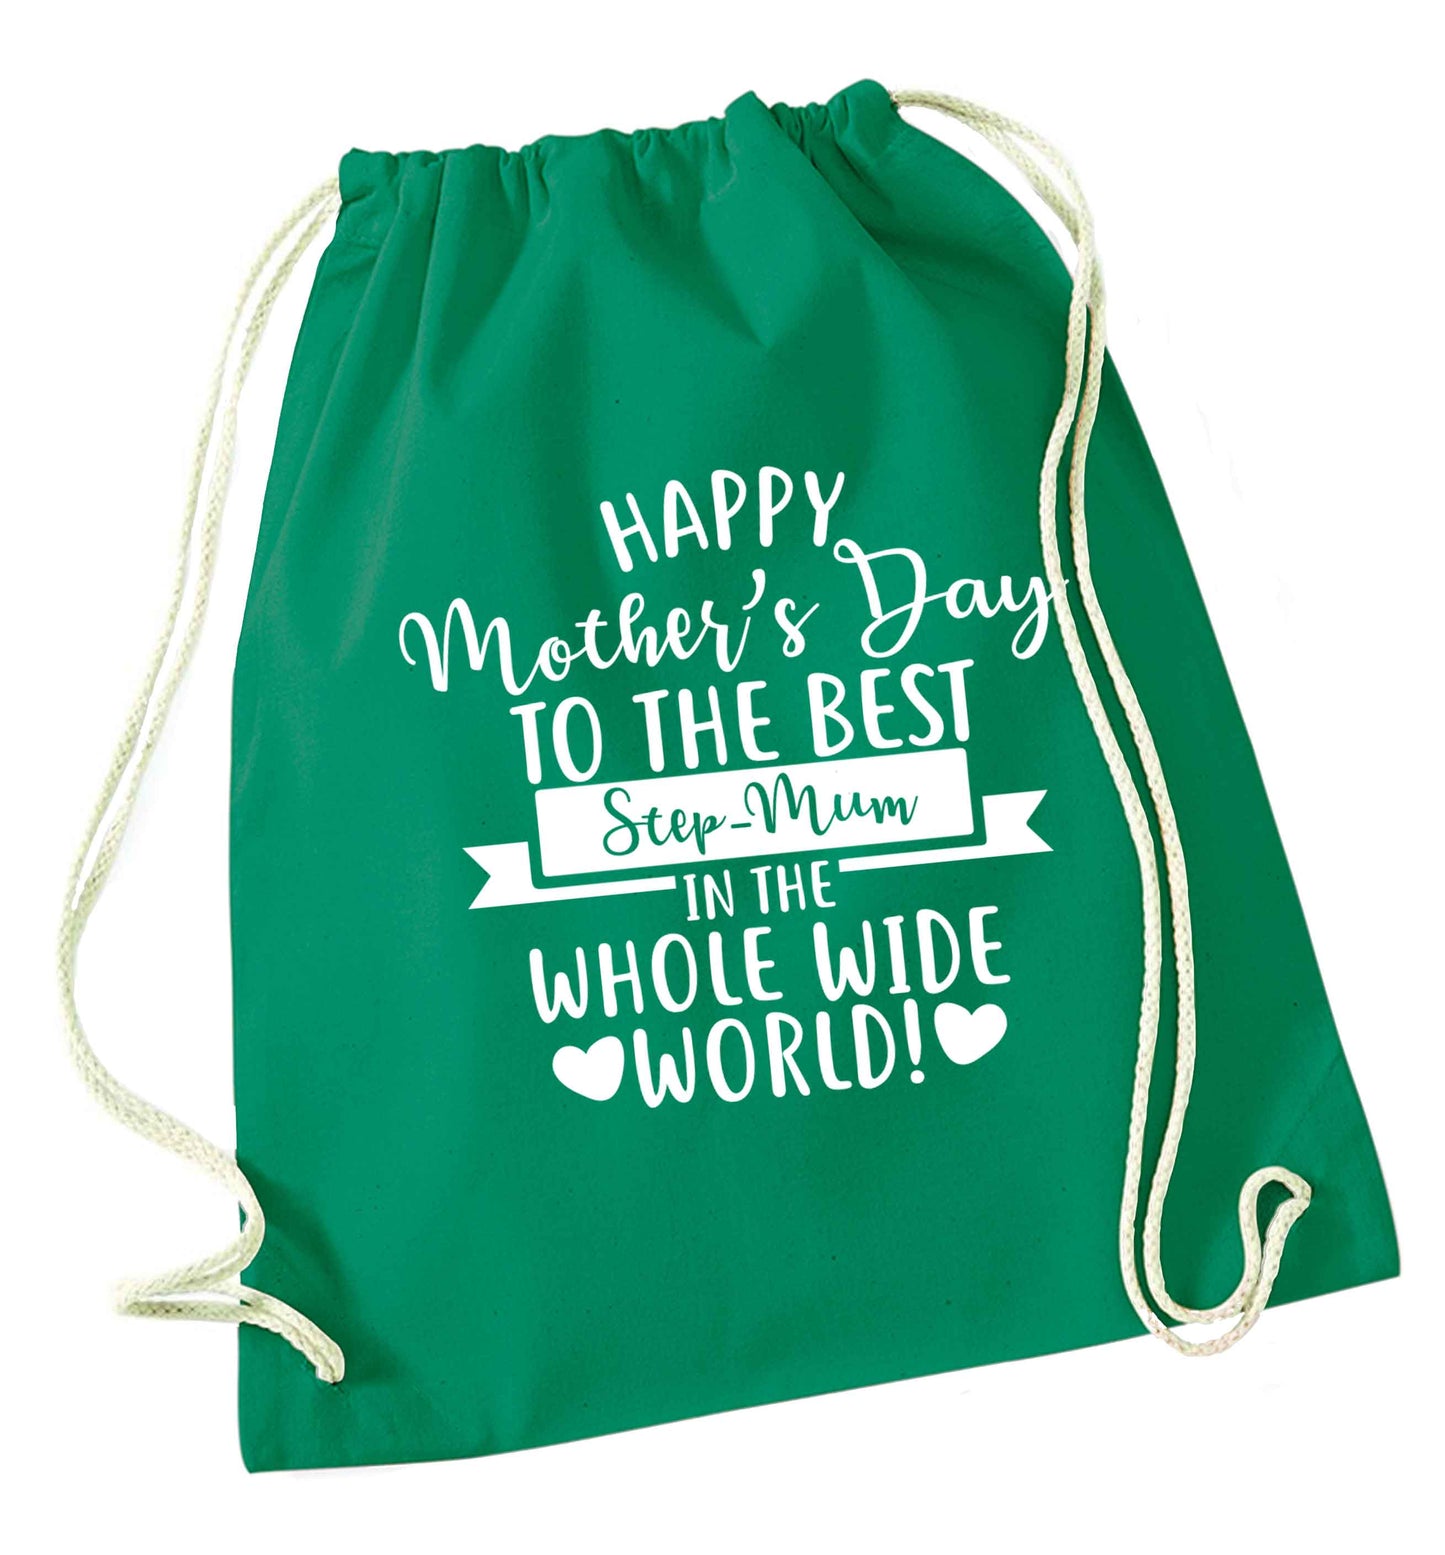 Happy mother's day to the best step-mum in the world green drawstring bag